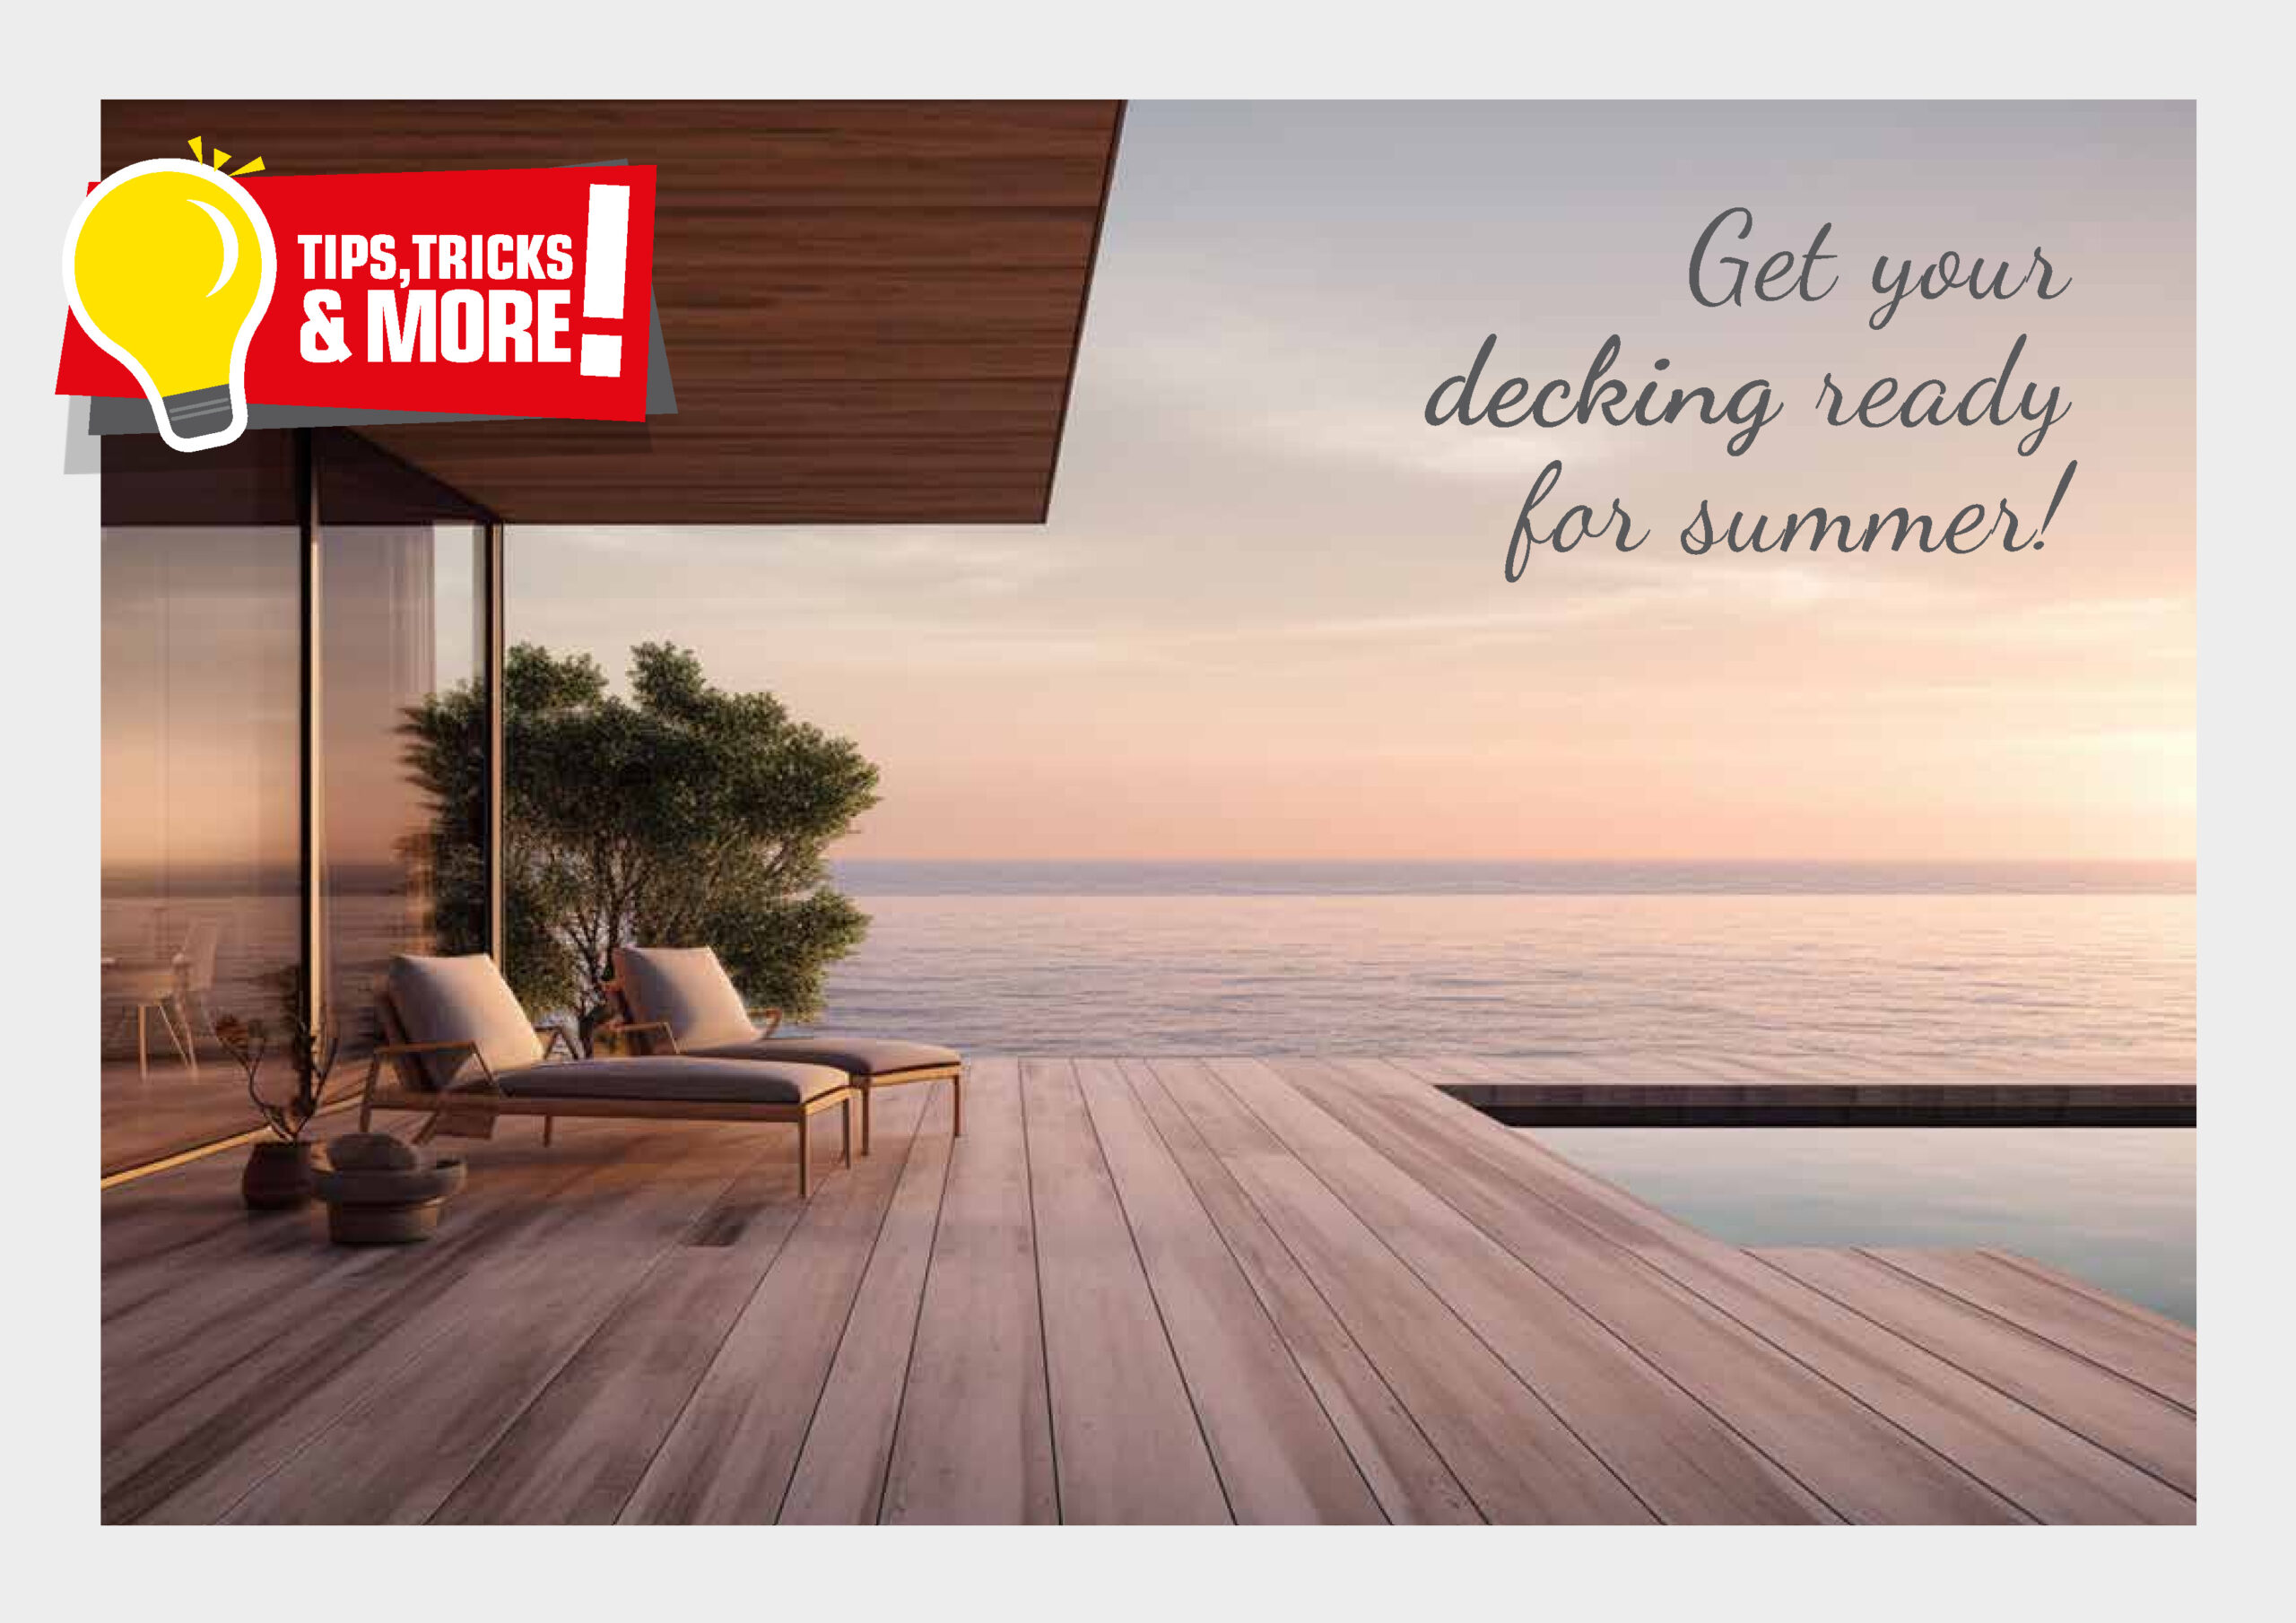 Get your decking ready for summer!